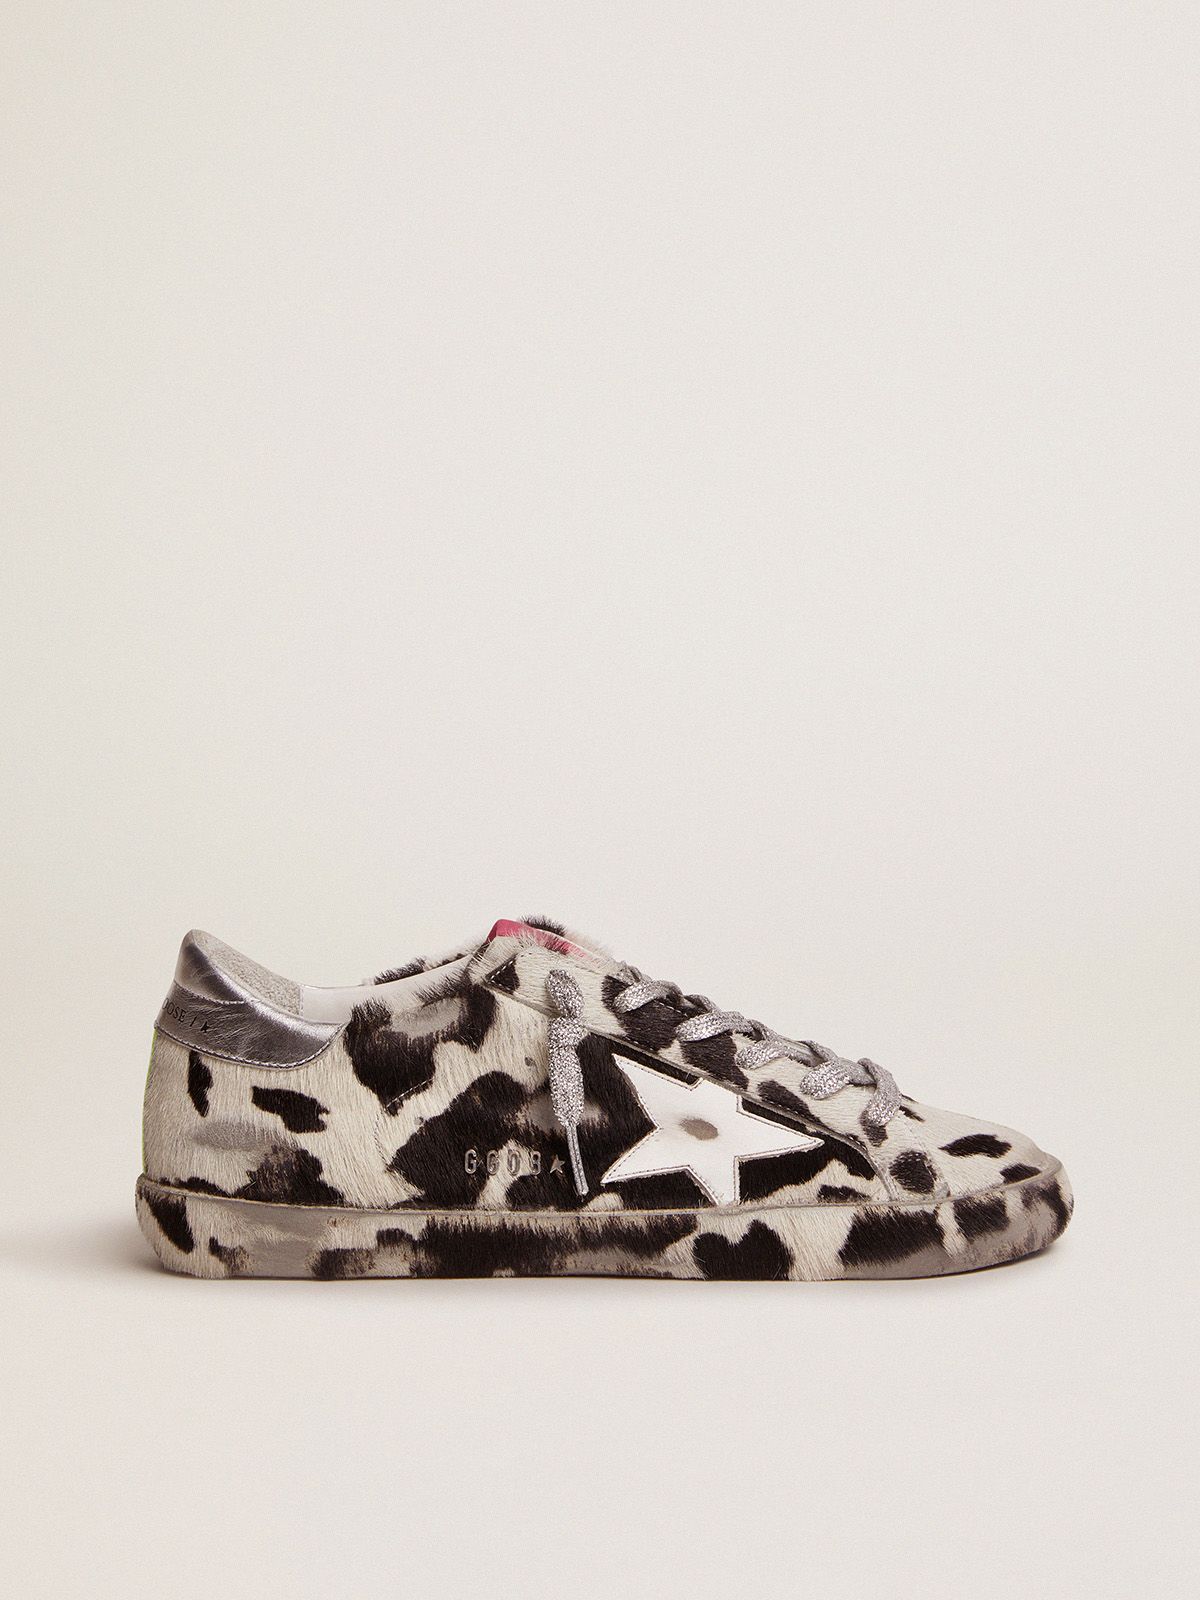 Sneakers Uomo Golden Goose Super-Star LAB sneakers in cow-print pony skin and white leather star